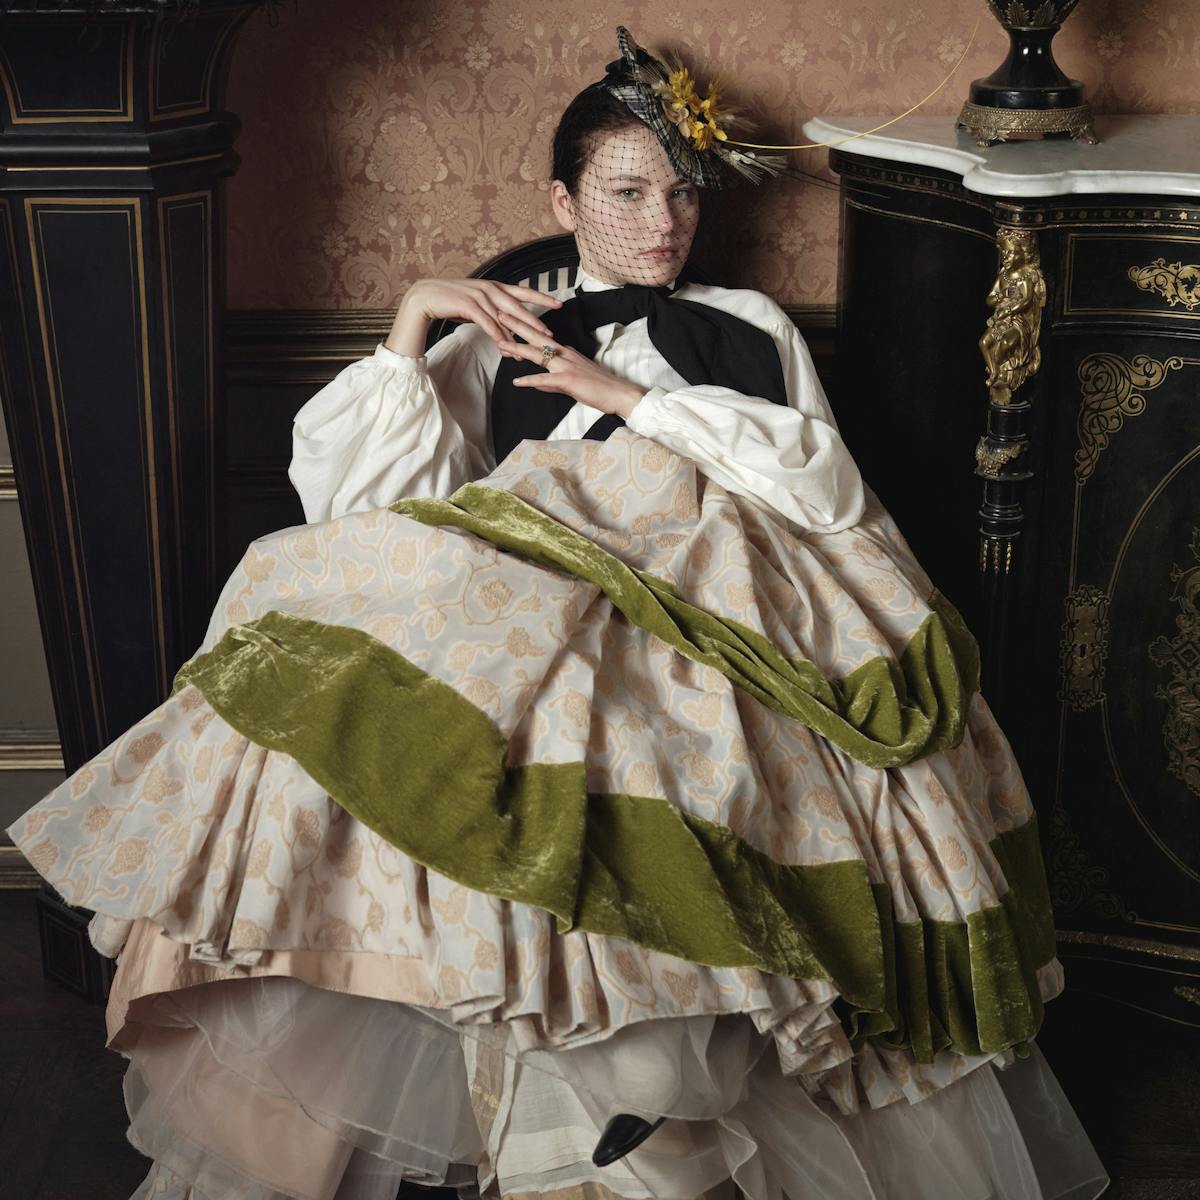 The empress wears a white and green dress with a black bow.